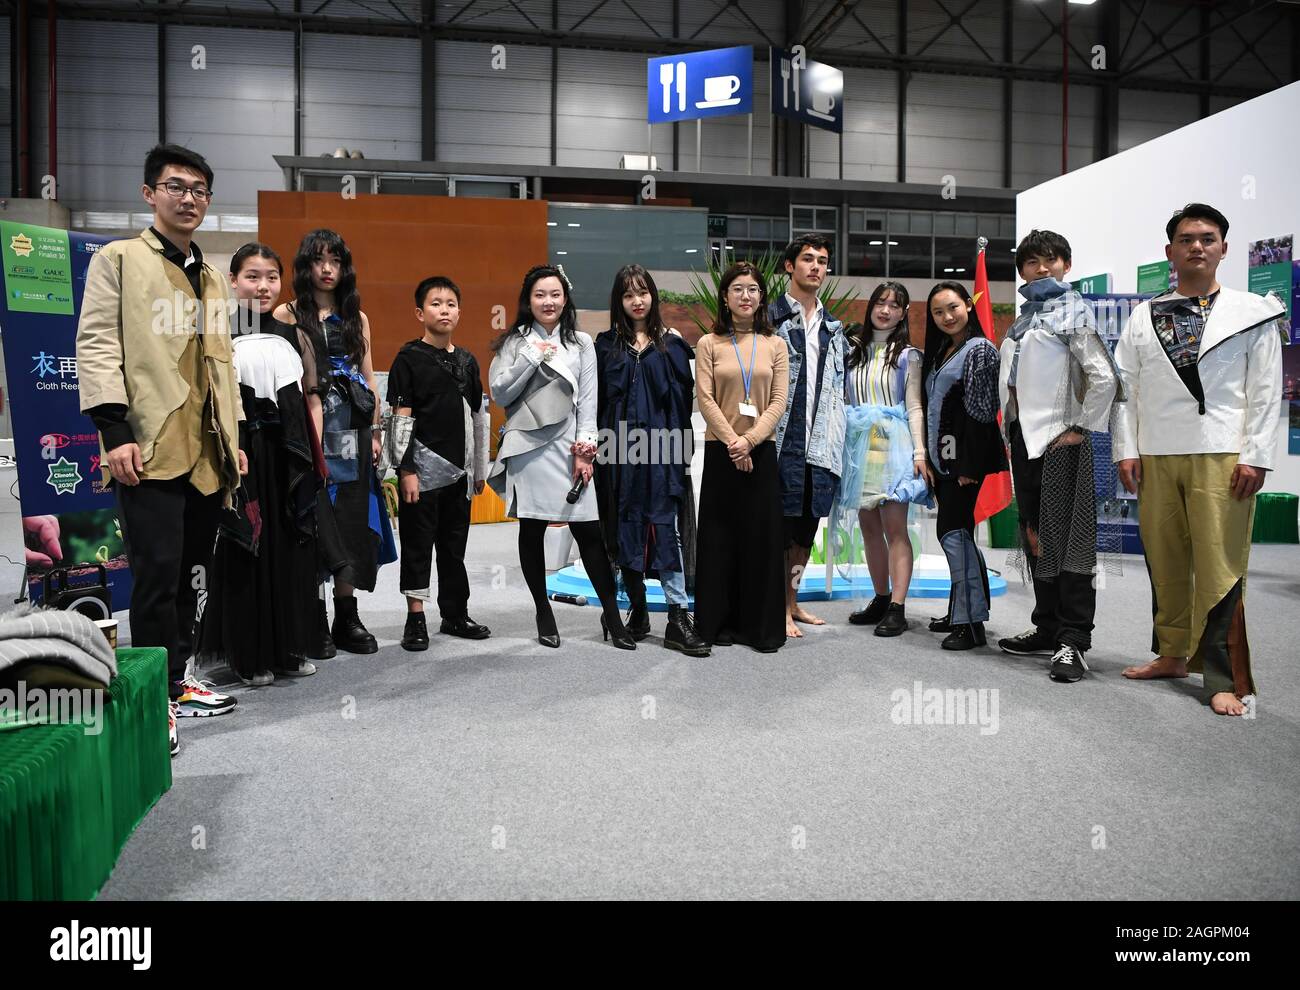 (191220) -- NEW YORK, Dec. 20, 2019 (Xinhua) -- Models present creations by Chinese college students during a side event of the United Nations Climate Change Conference (COP25) in Madrid, Spain, on Dec. 12, 2019. Unilateralism and protectionism have been eroding the global governance system throughout 2019, prompting widespread concern among members of the international community. Braving such headwinds, China has been doing its utmost to defend multilateralism, via concrete actions such as paying in full all it owes for the 2019 UN regular budget, actively participating in climate action, str Stock Photo